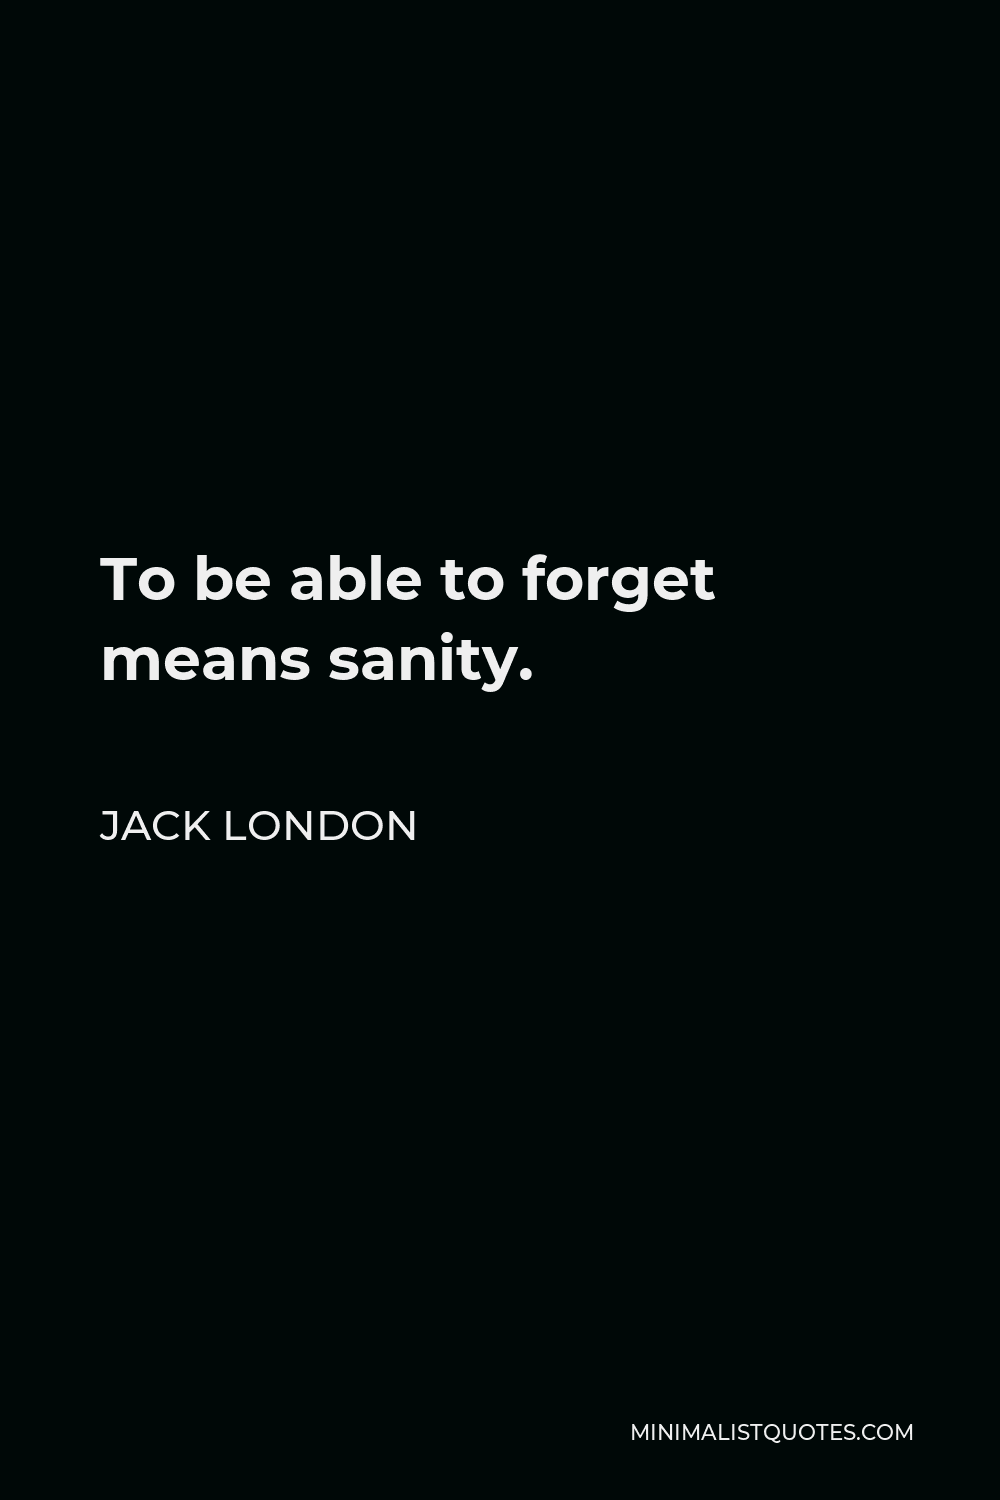 Jack London Quote: The proper function of man is to live, not to exist ...